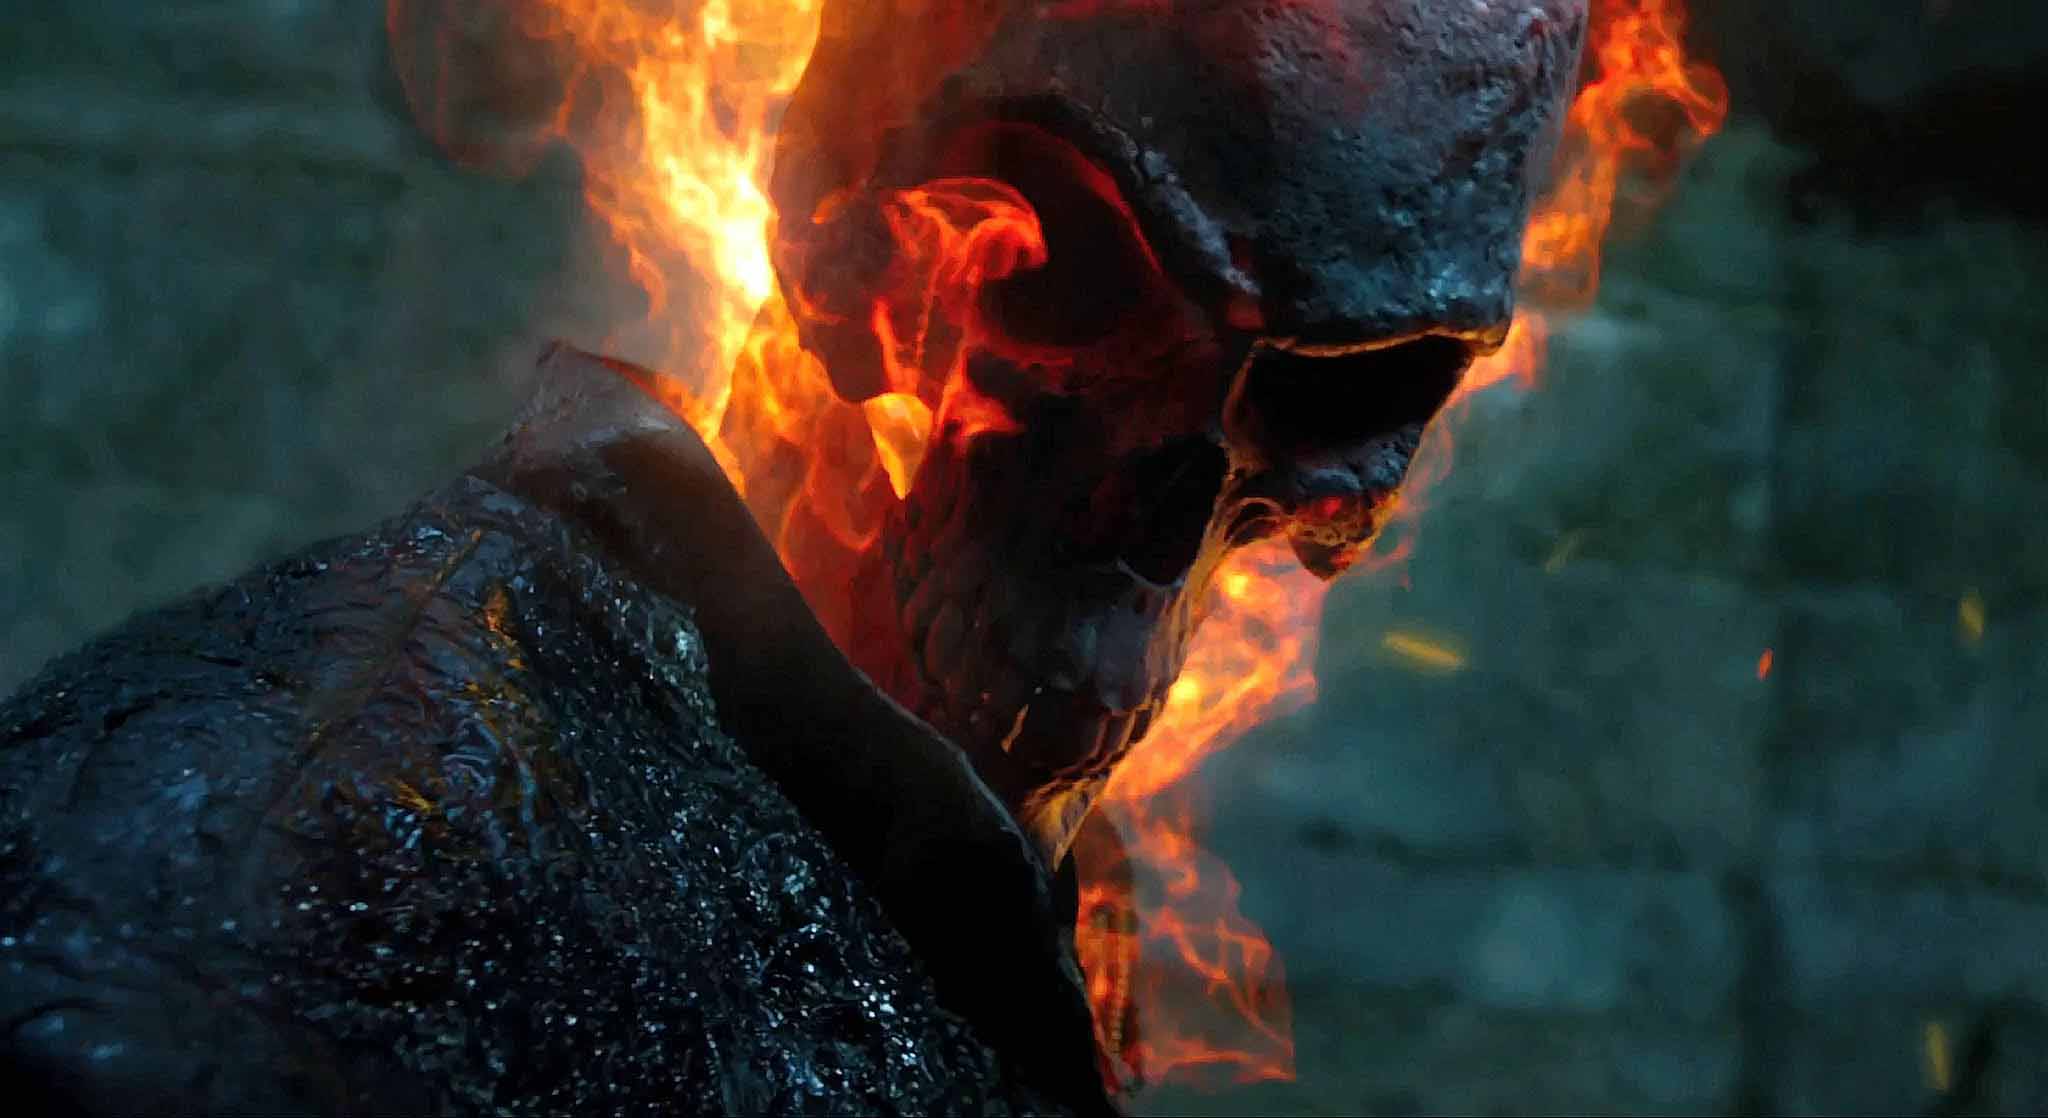 ghost rider wallpaper HD 10 - Image And Wallpaper free